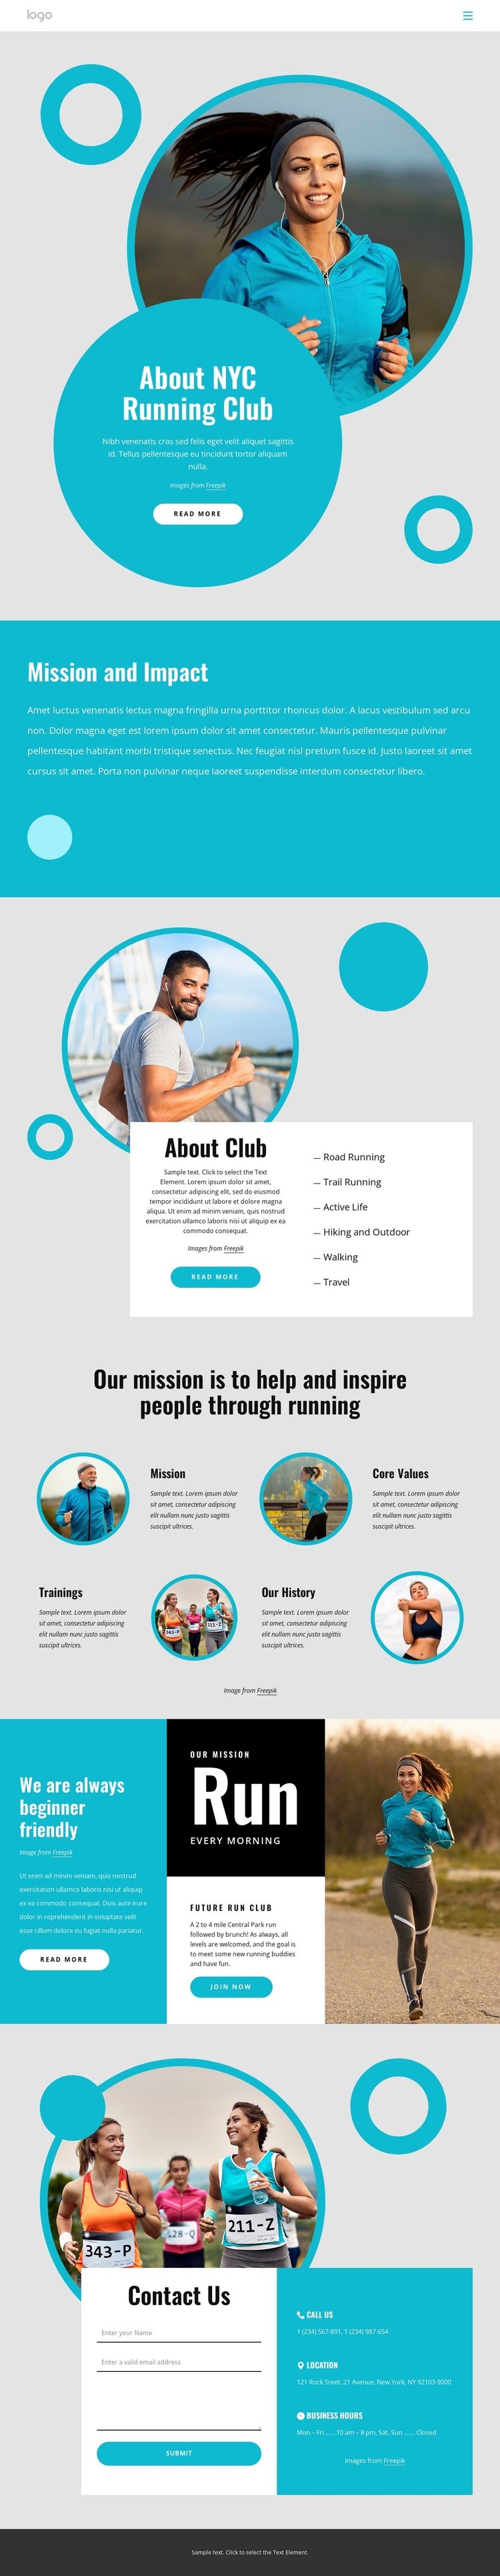 About NYC running club Wix Template Alternative